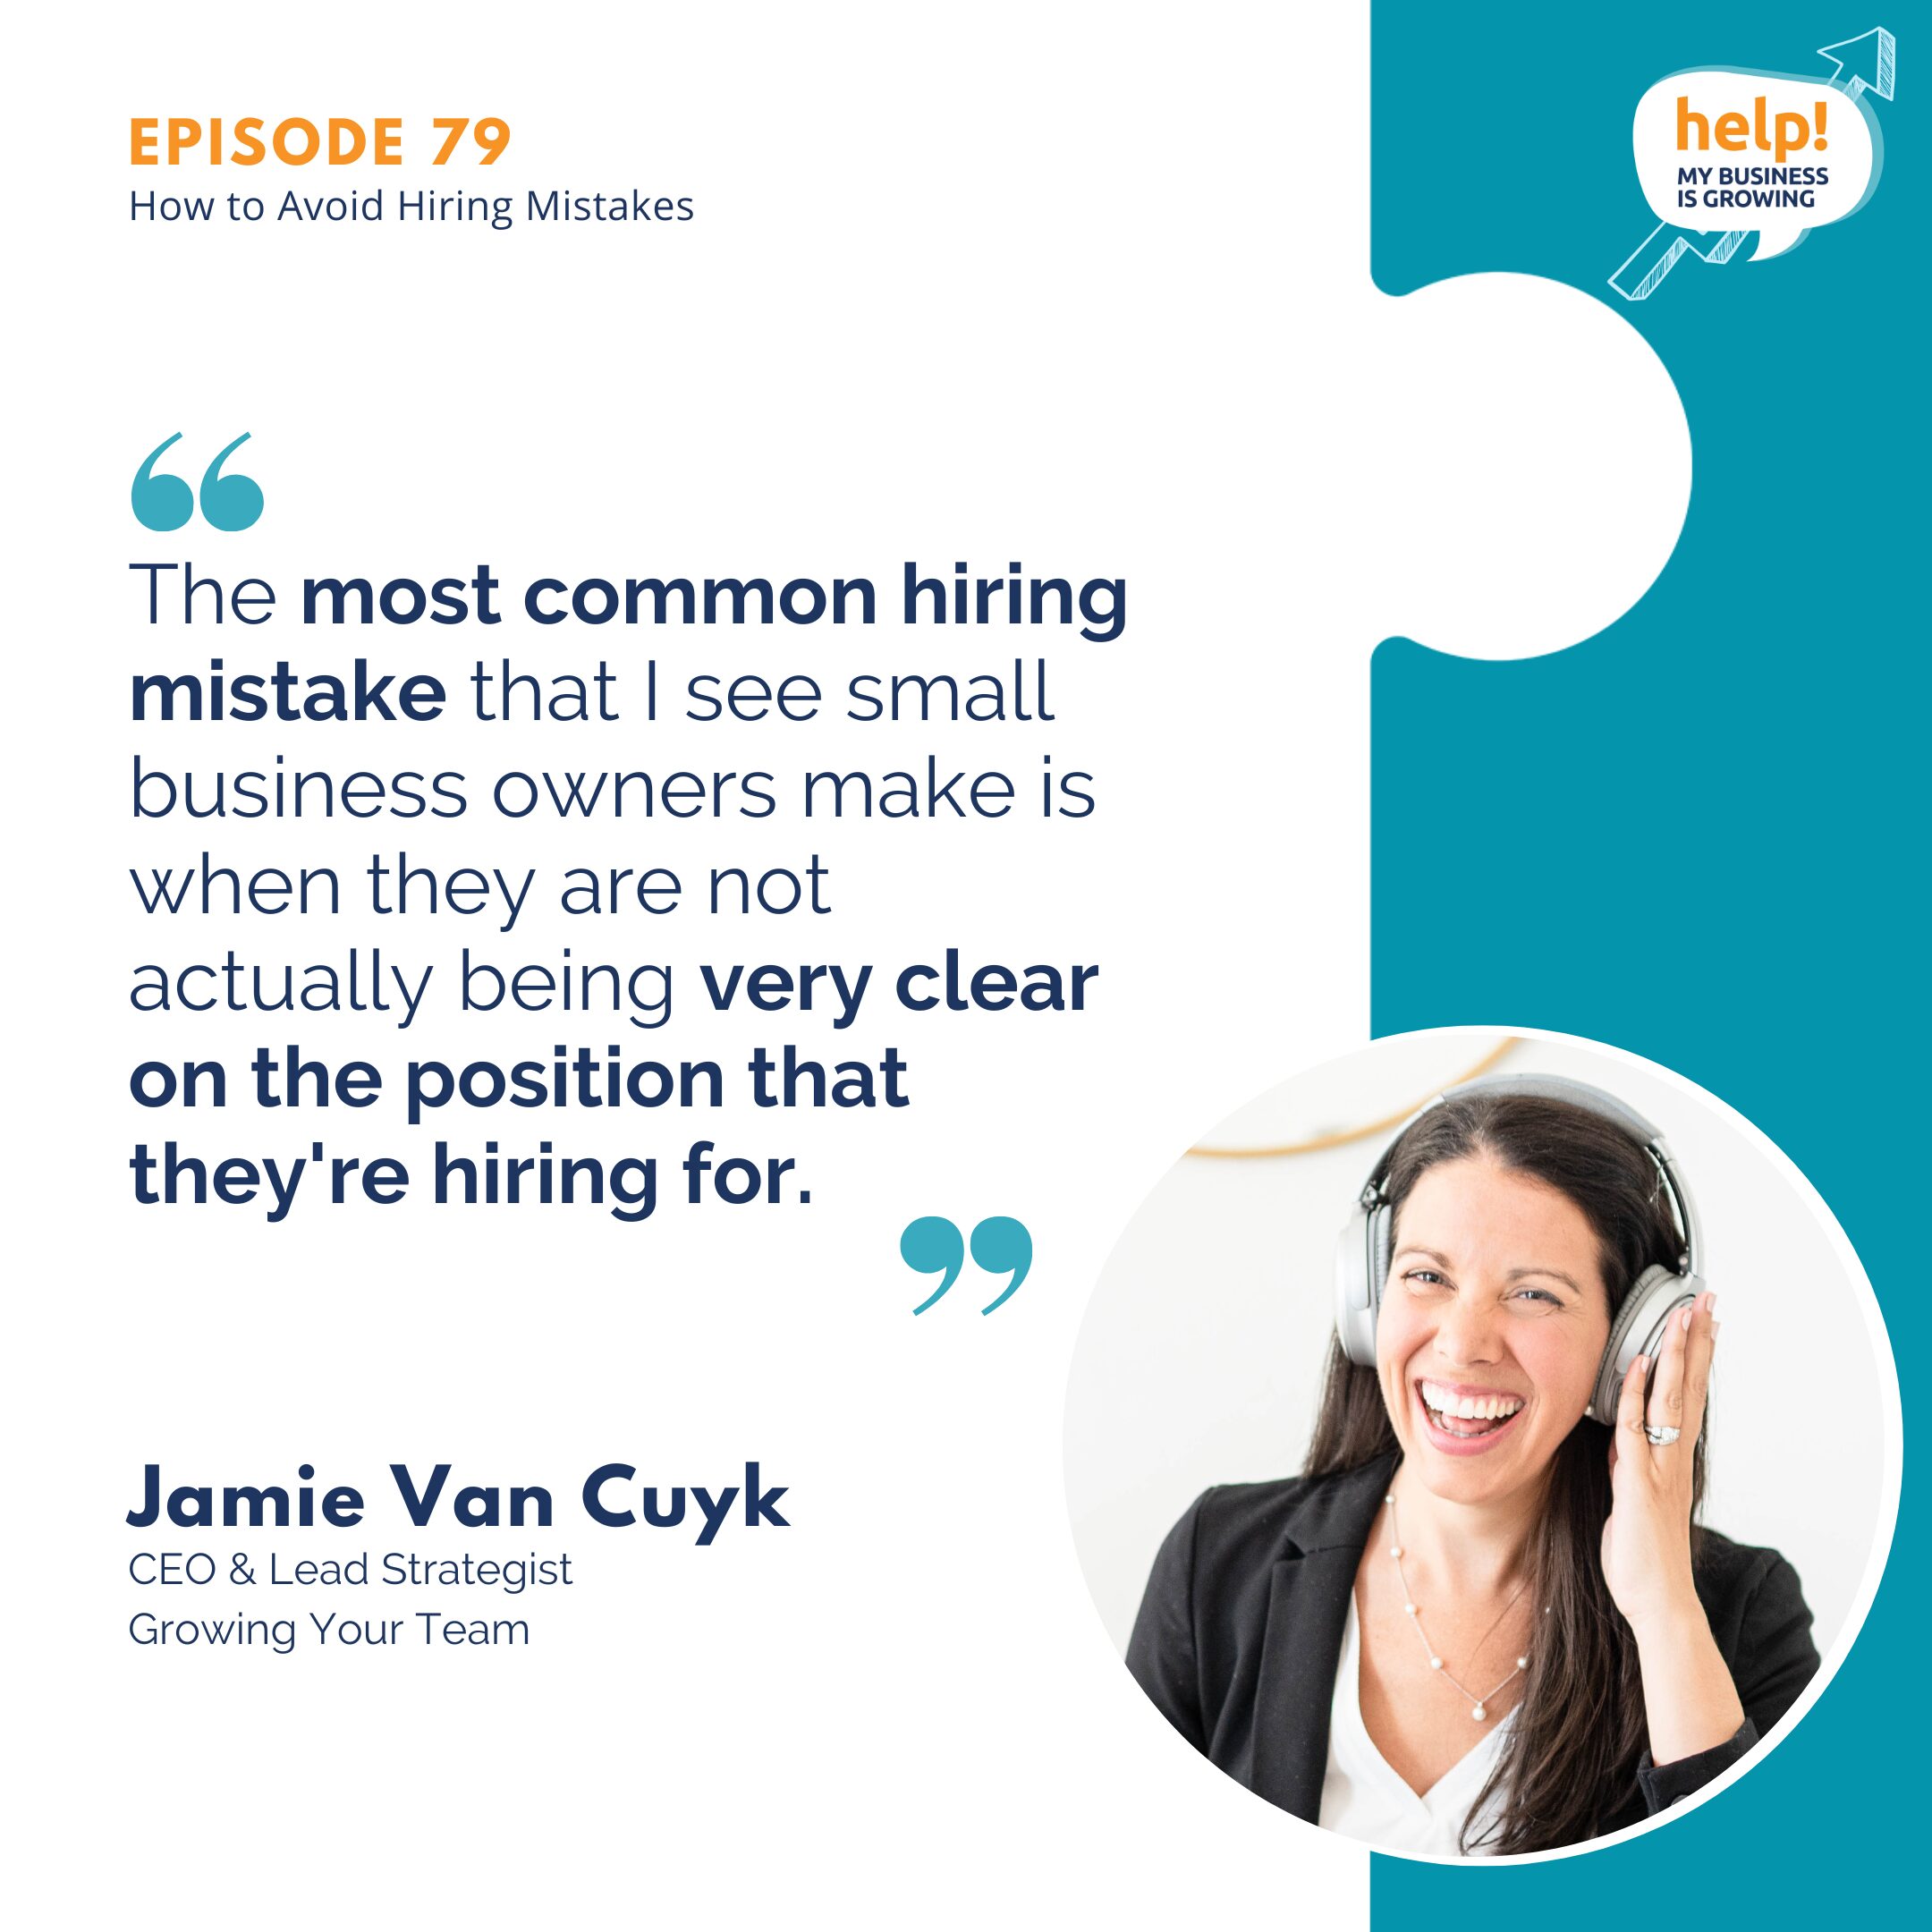 The most common hiring mistake that I see small business owners make is when they are not actually being very clear on the position that they're hiring for.